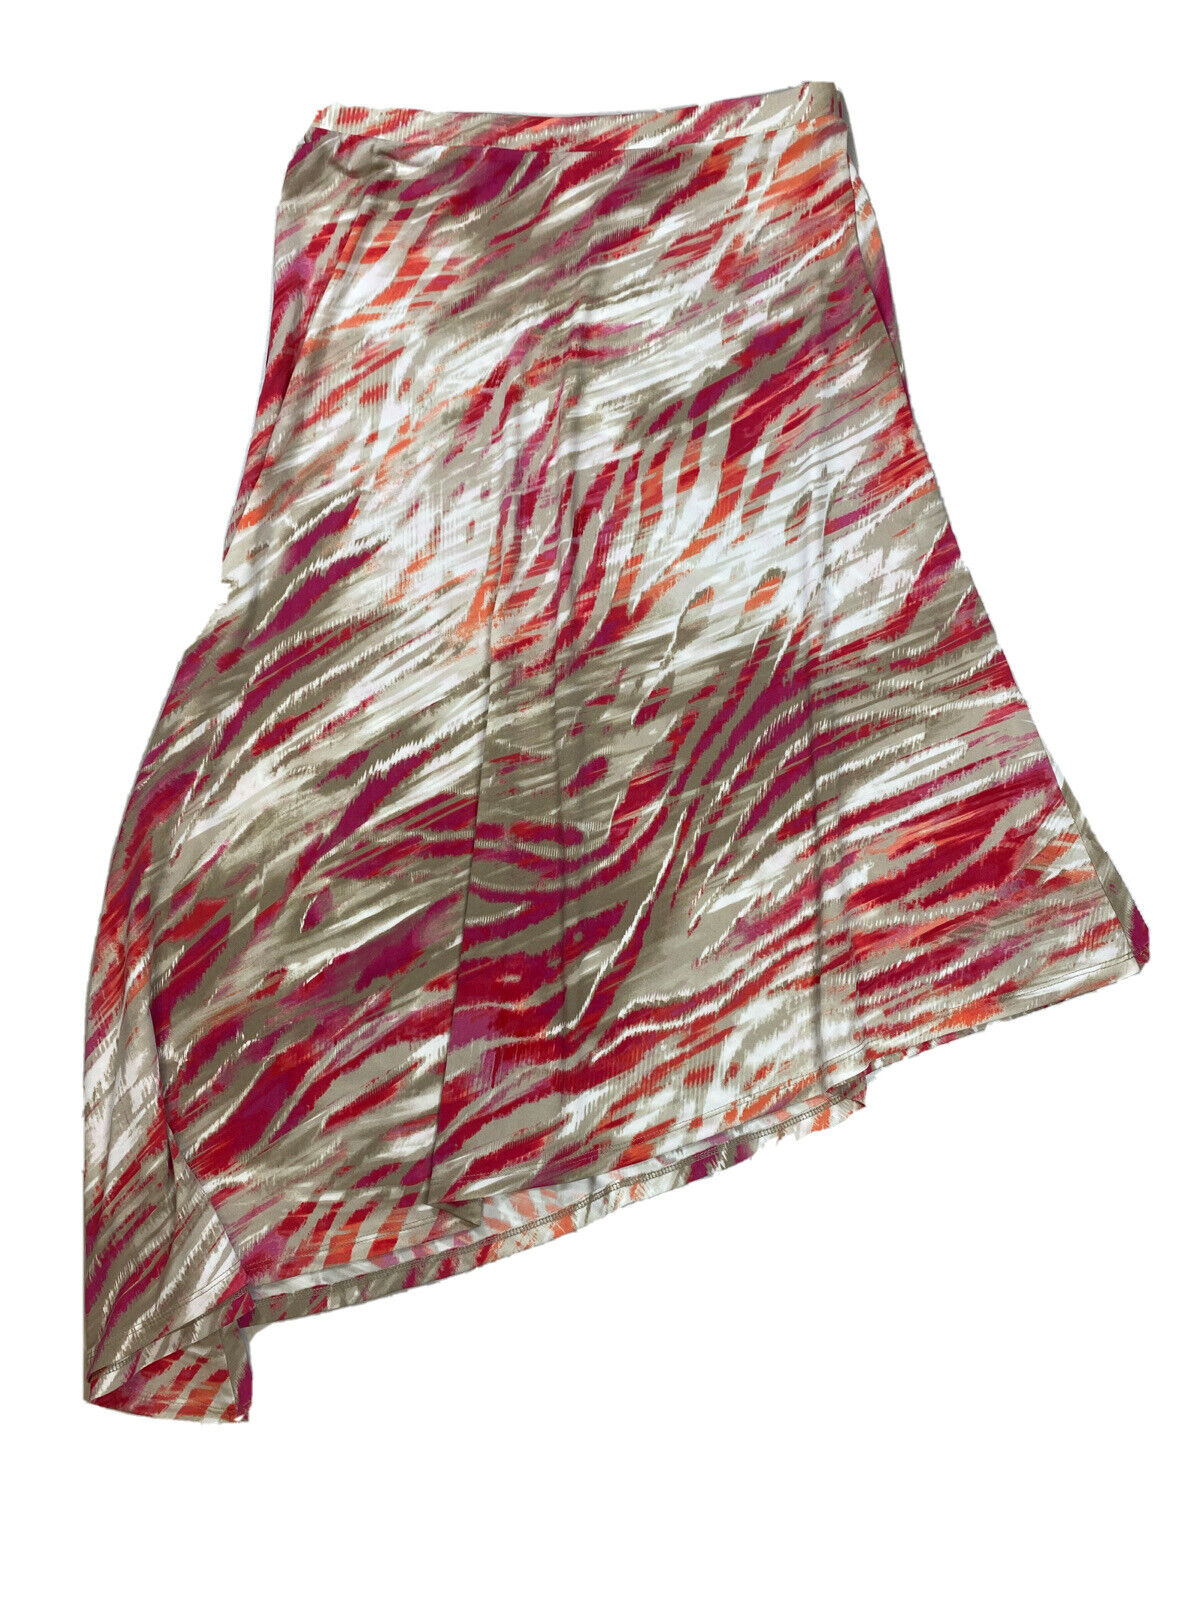 Chico's Women's Beige & Red Stretch Asymmetrical Pull On Skirt - 0/US 4